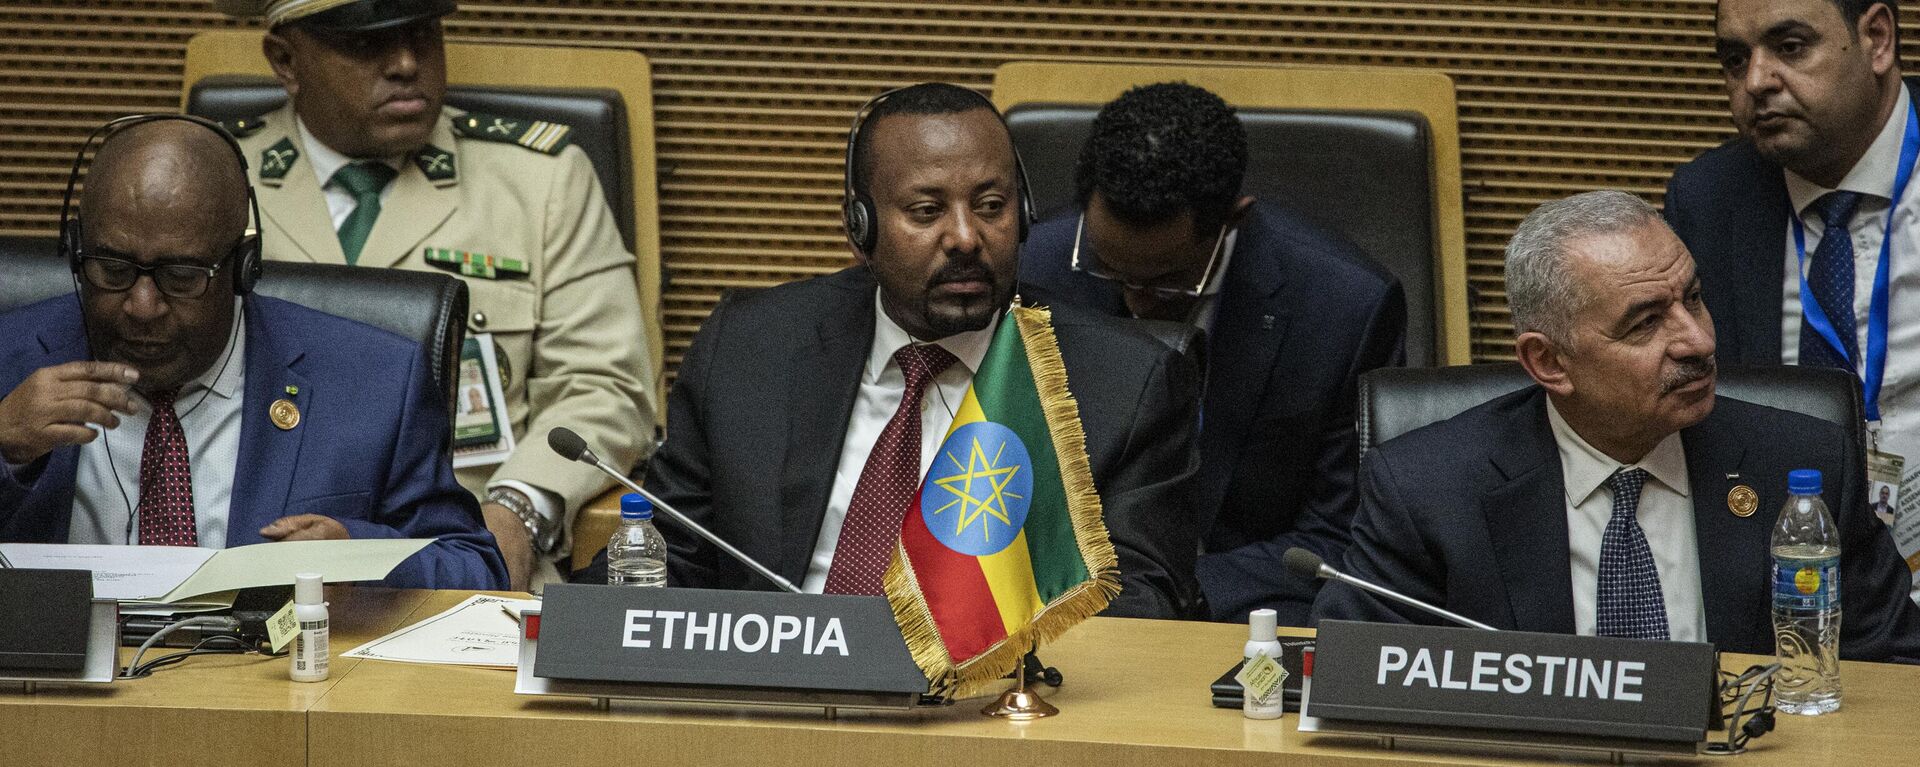 Outgoing chairperson of the African Union and President of Comoros Azali Assoumani (L), Prime Minister of Ethiopia Abiy Ahmed (C) and Palestinian Prime Minister Mohammad Shtayyeh (R) attend the opening ceremony of the 37th Ordinary Session of the Assembly of the African Union (AU) at the AU headquarters in Addis Ababa on February 17, 2024.  - Sputnik Africa, 1920, 17.02.2024